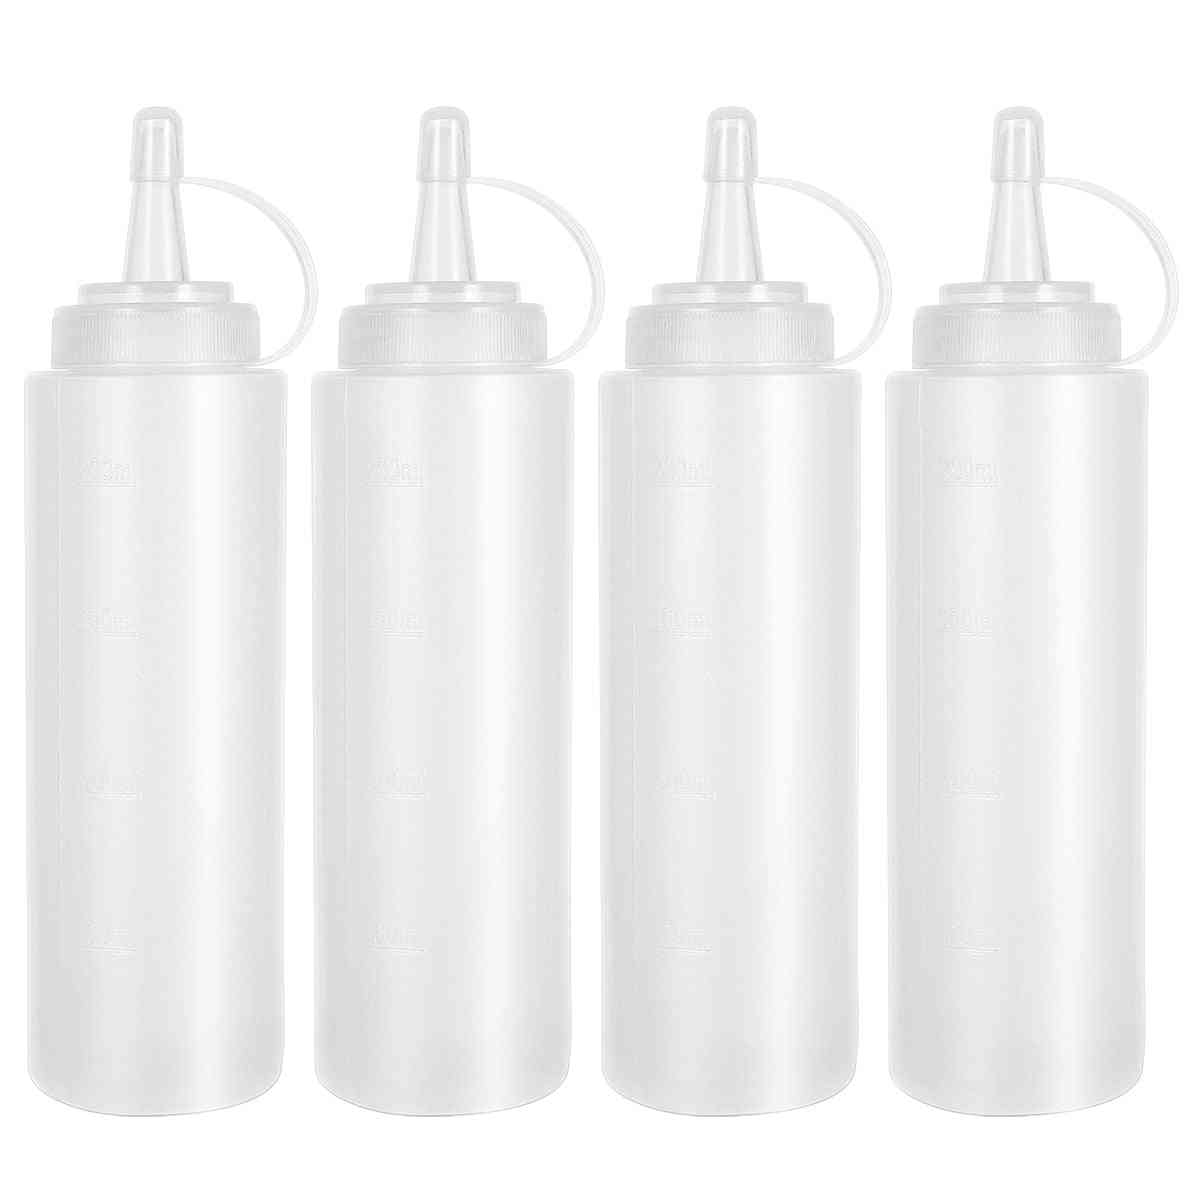 Squeeze Squirt Condiment Bottles With Cap Lid